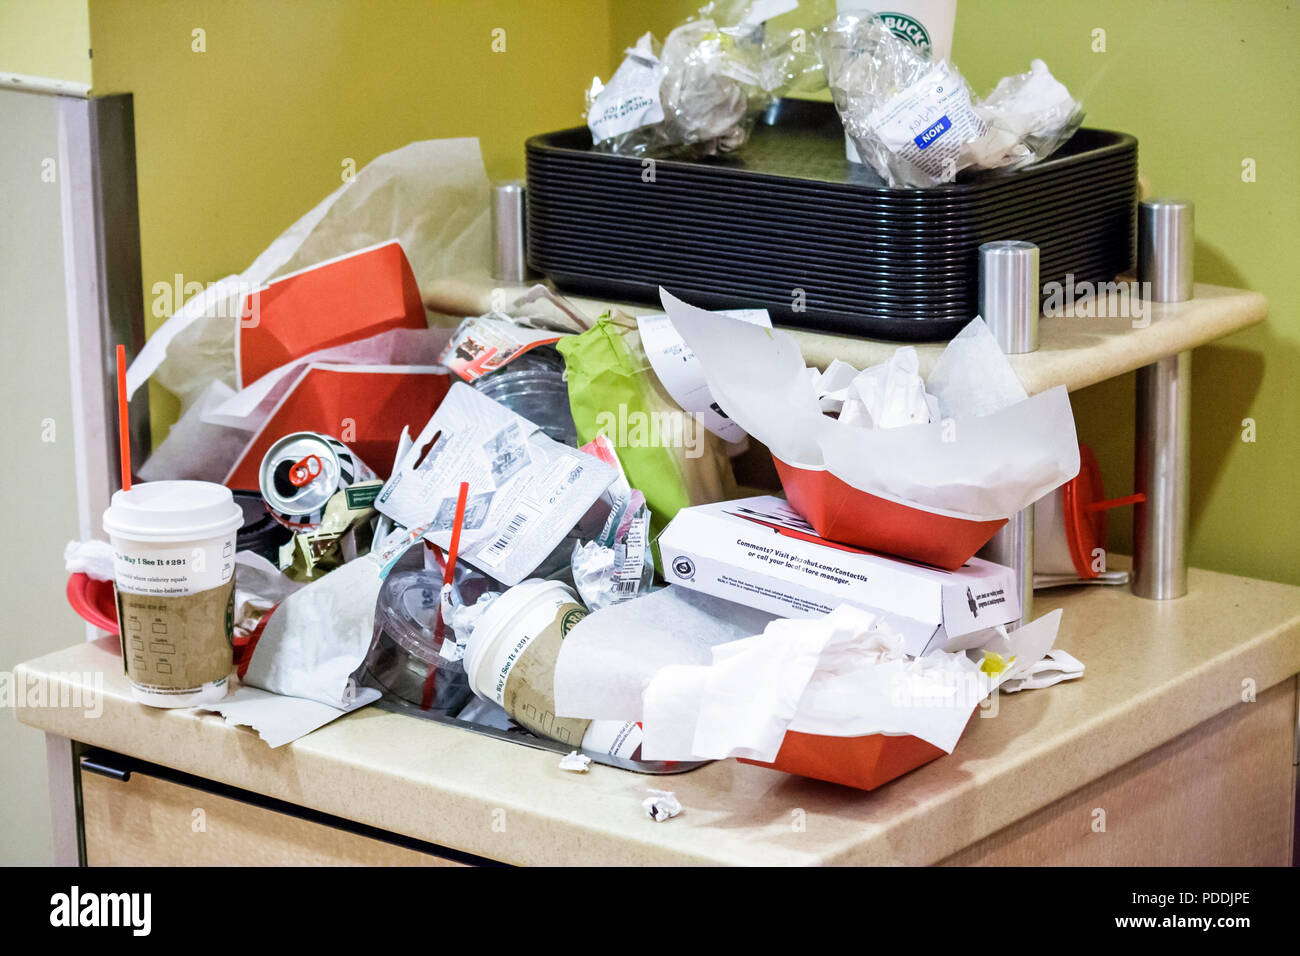 Miami Florida,Shops at Midtown,Target Discount Store,trash,cups,cans,food containers,paper,waste,dirty,nasty,overflow,full,FL080406093 Stock Photo